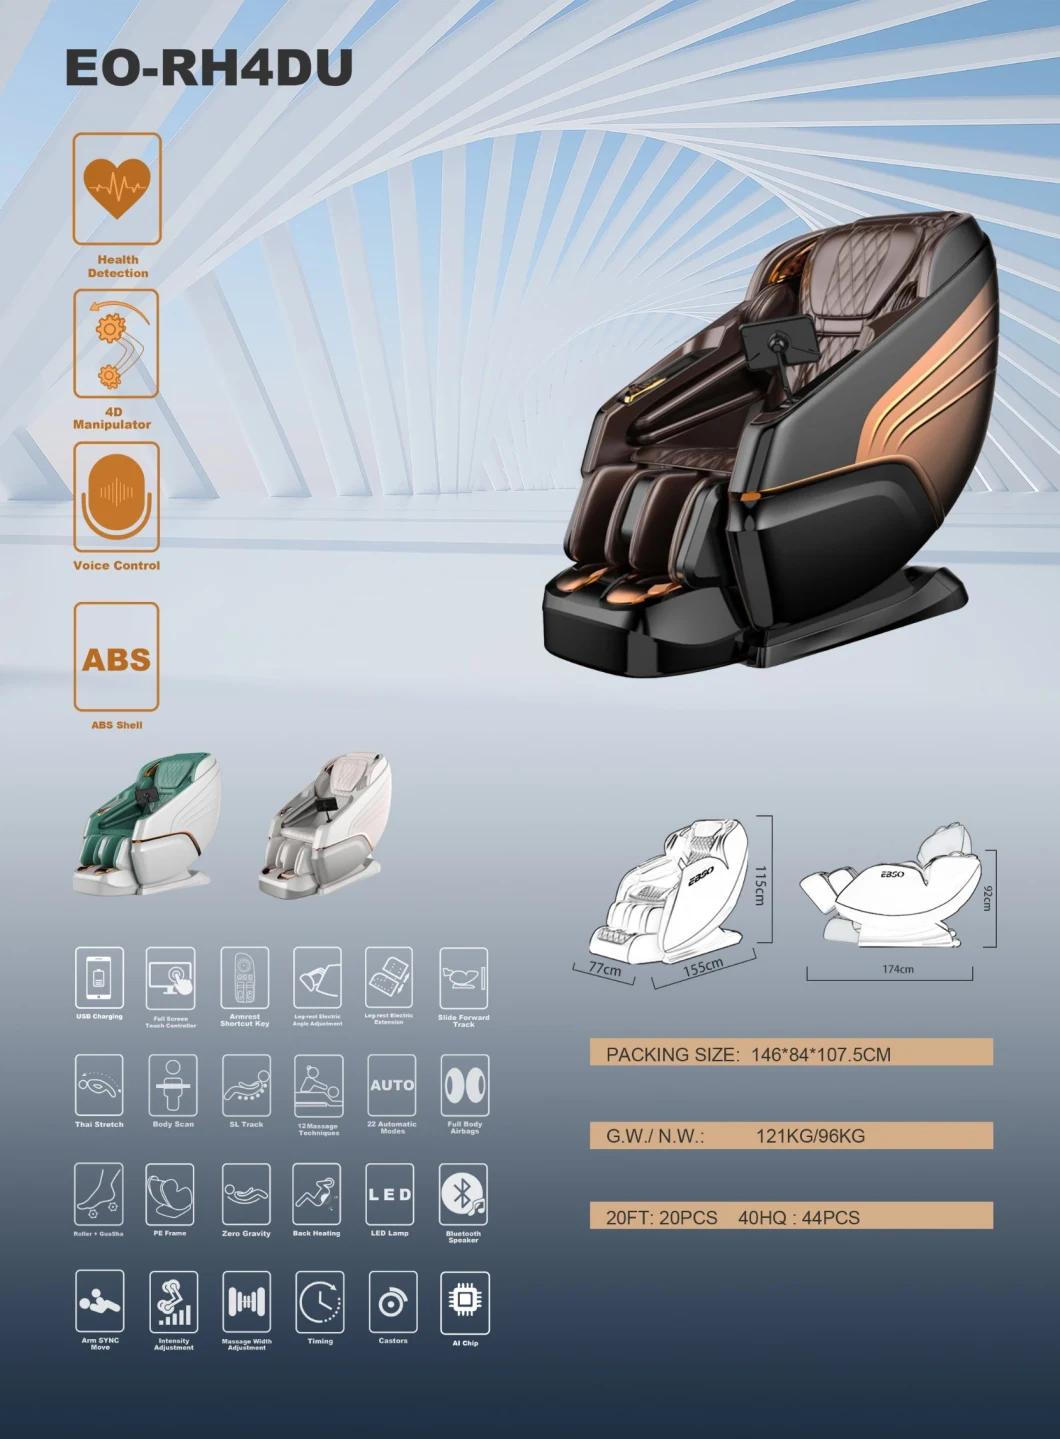 Large Gua Sha Massage Tool Zero Gravity Full Body Massage Chair with Heat Full Abilities Massage Chair with Health Detection